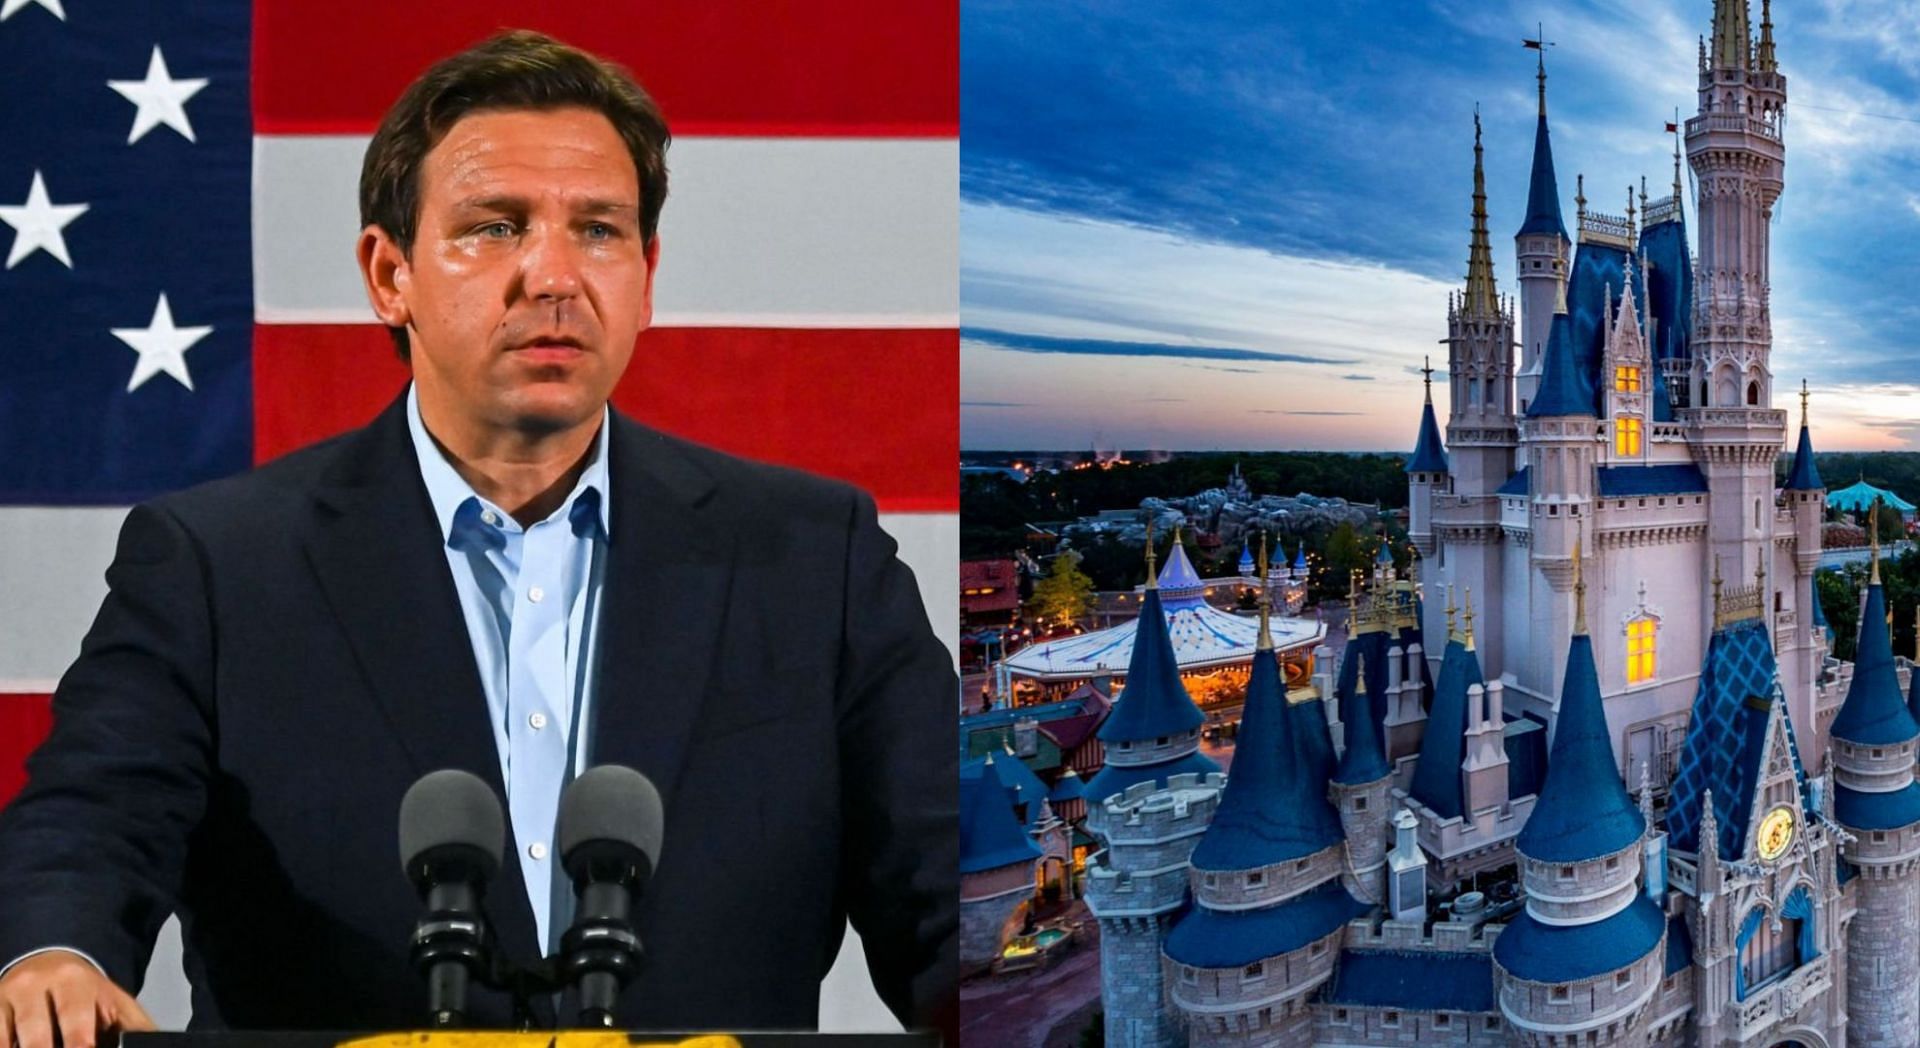 Ron DeSantis signed a bill giving the state control over Disney